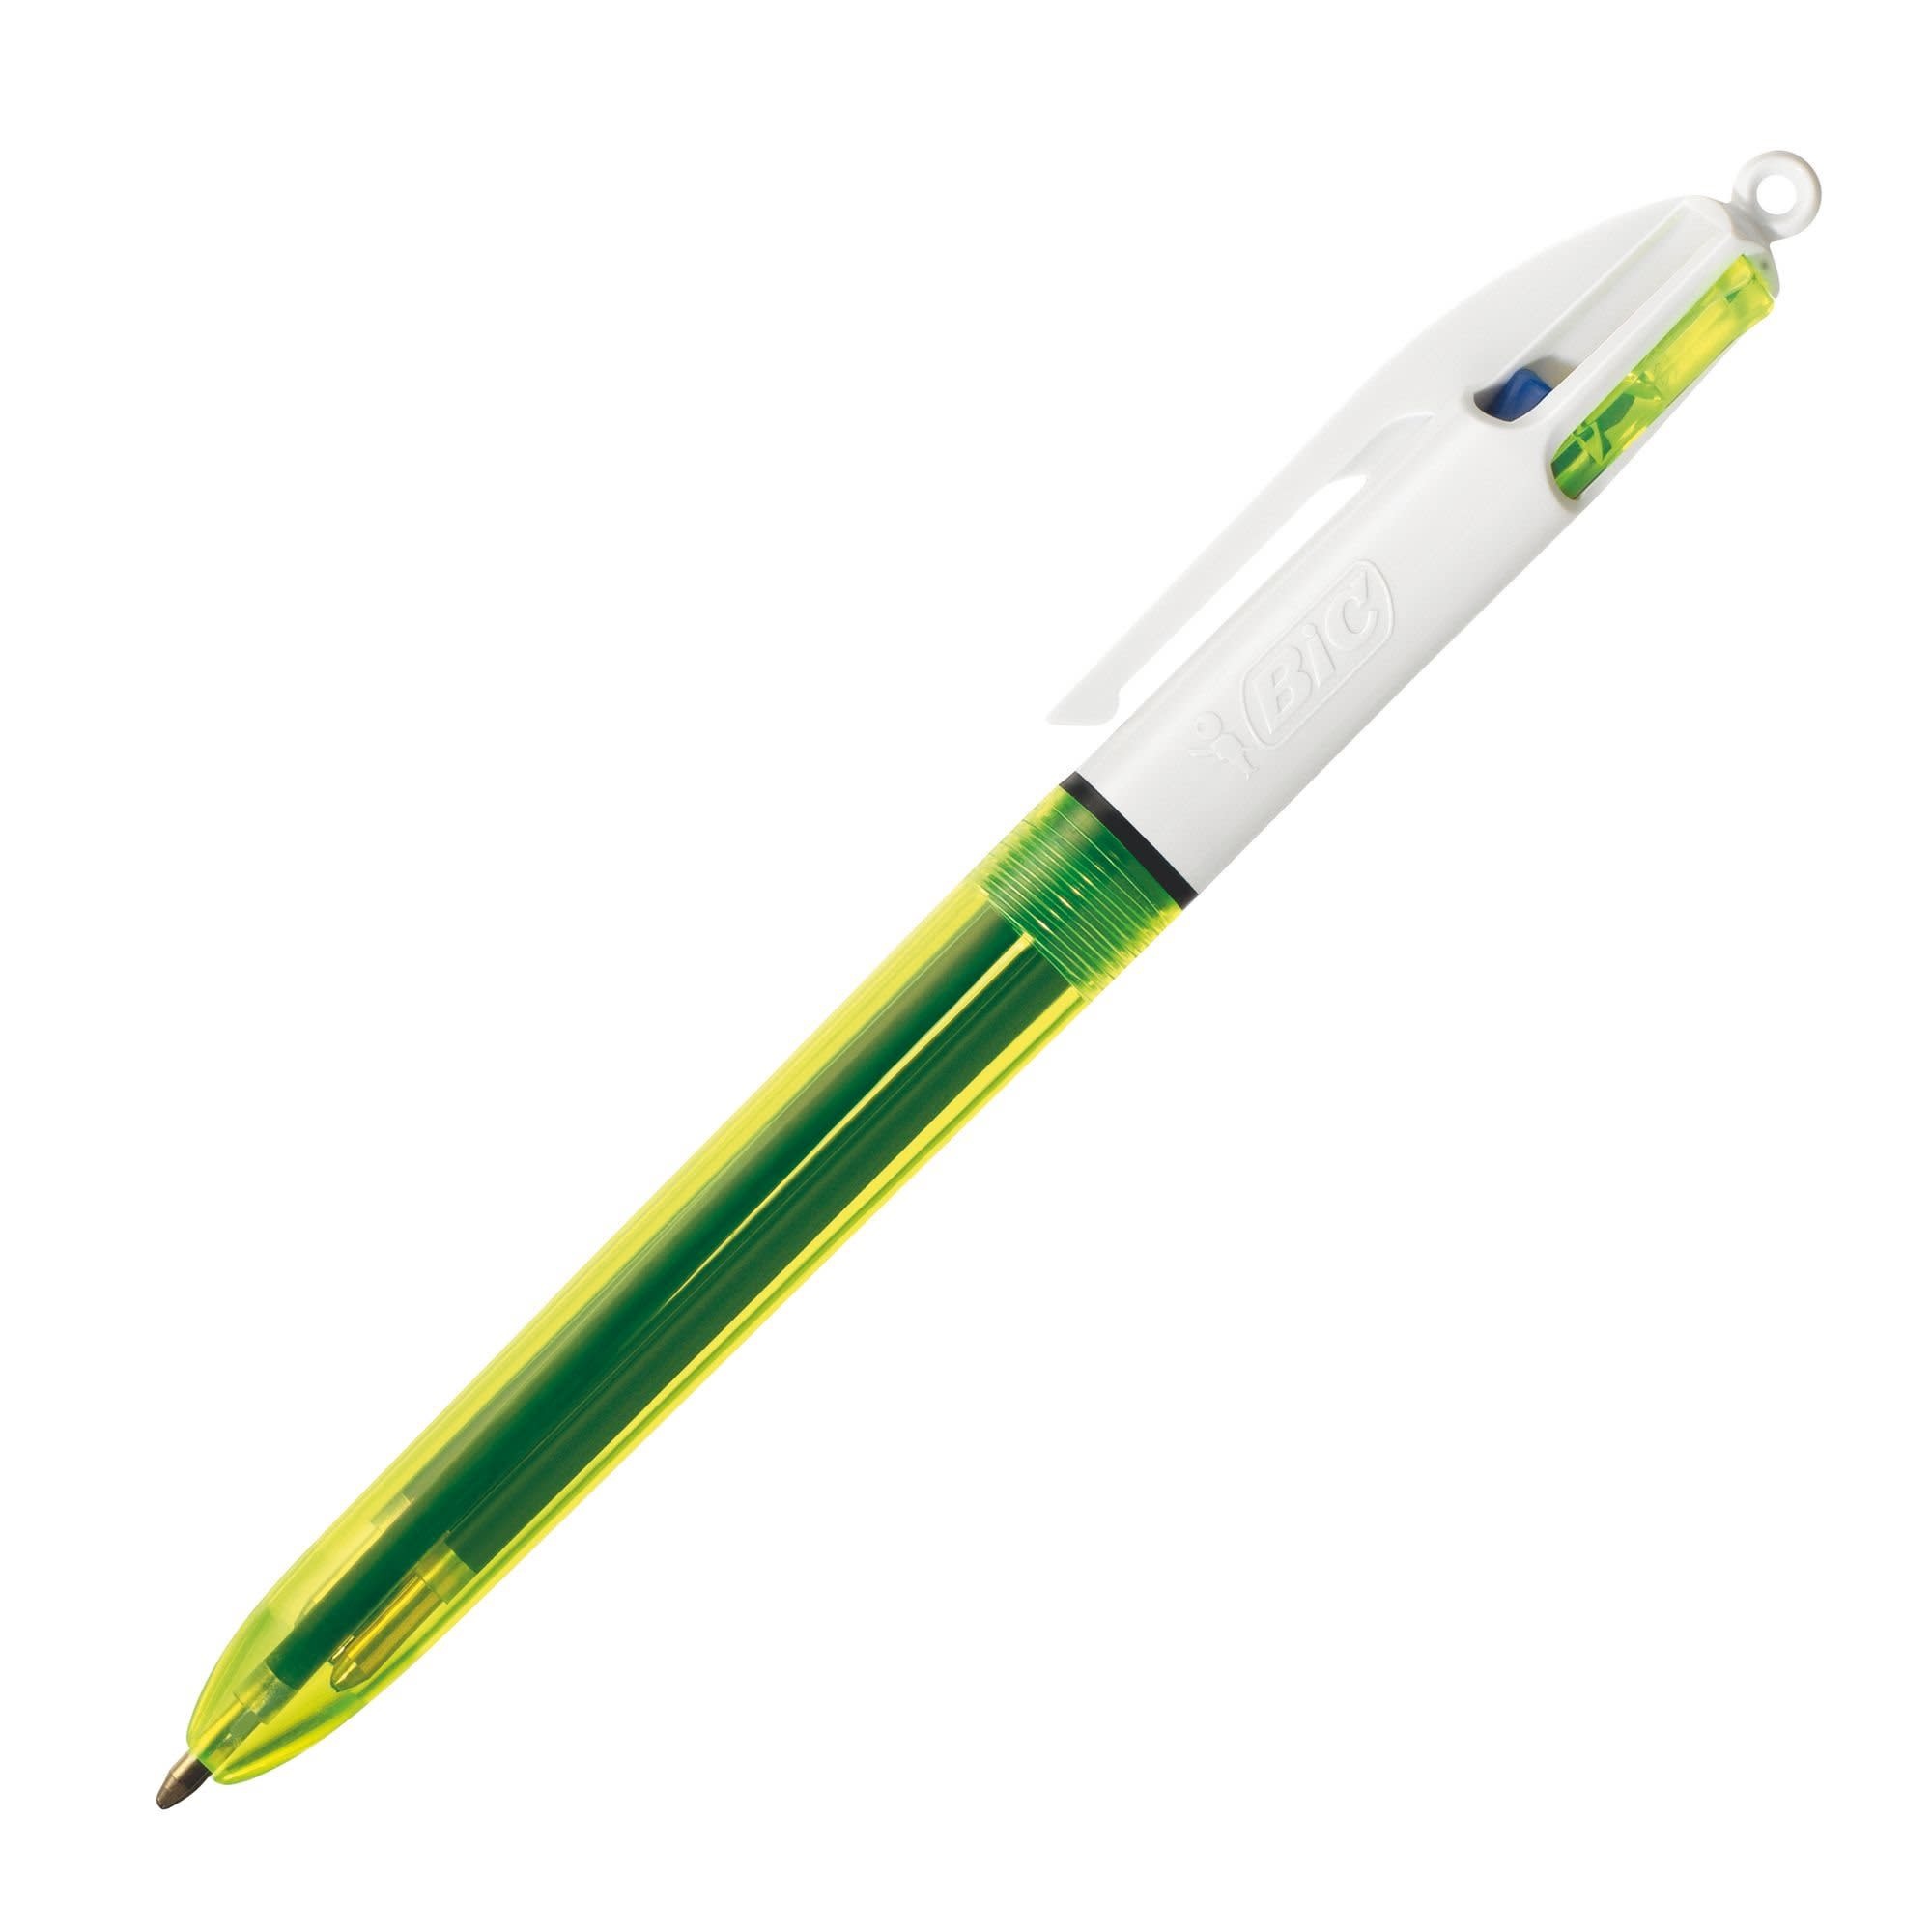 BIC 4 COULEURS FLUO Pointe Moyenne - Encres N/B/R & Pointe large 1,6 mm  Jaune Fluo